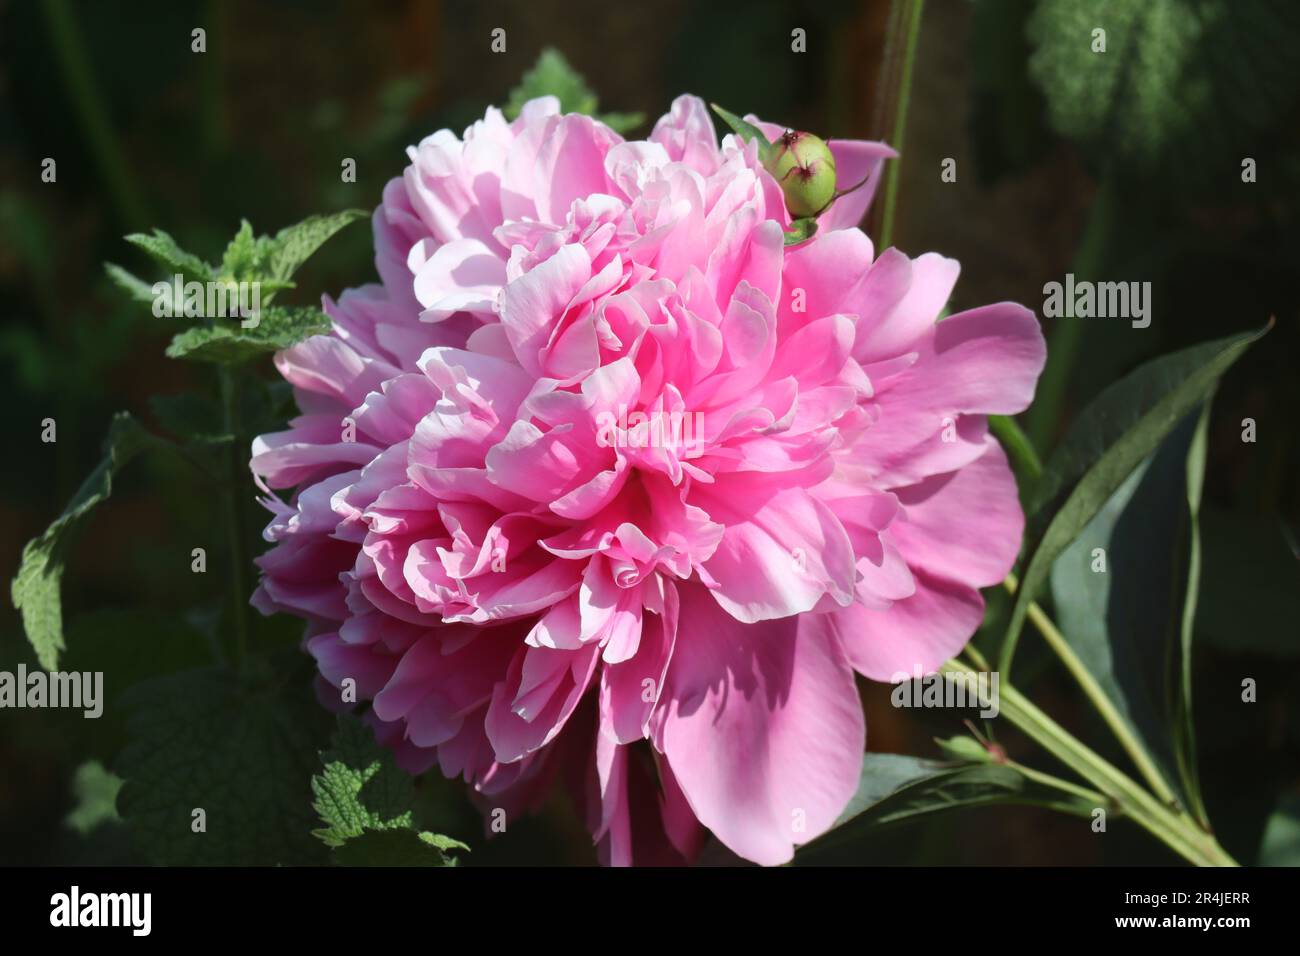 Flower head of Perennial peony in the Morning light Stock Photo